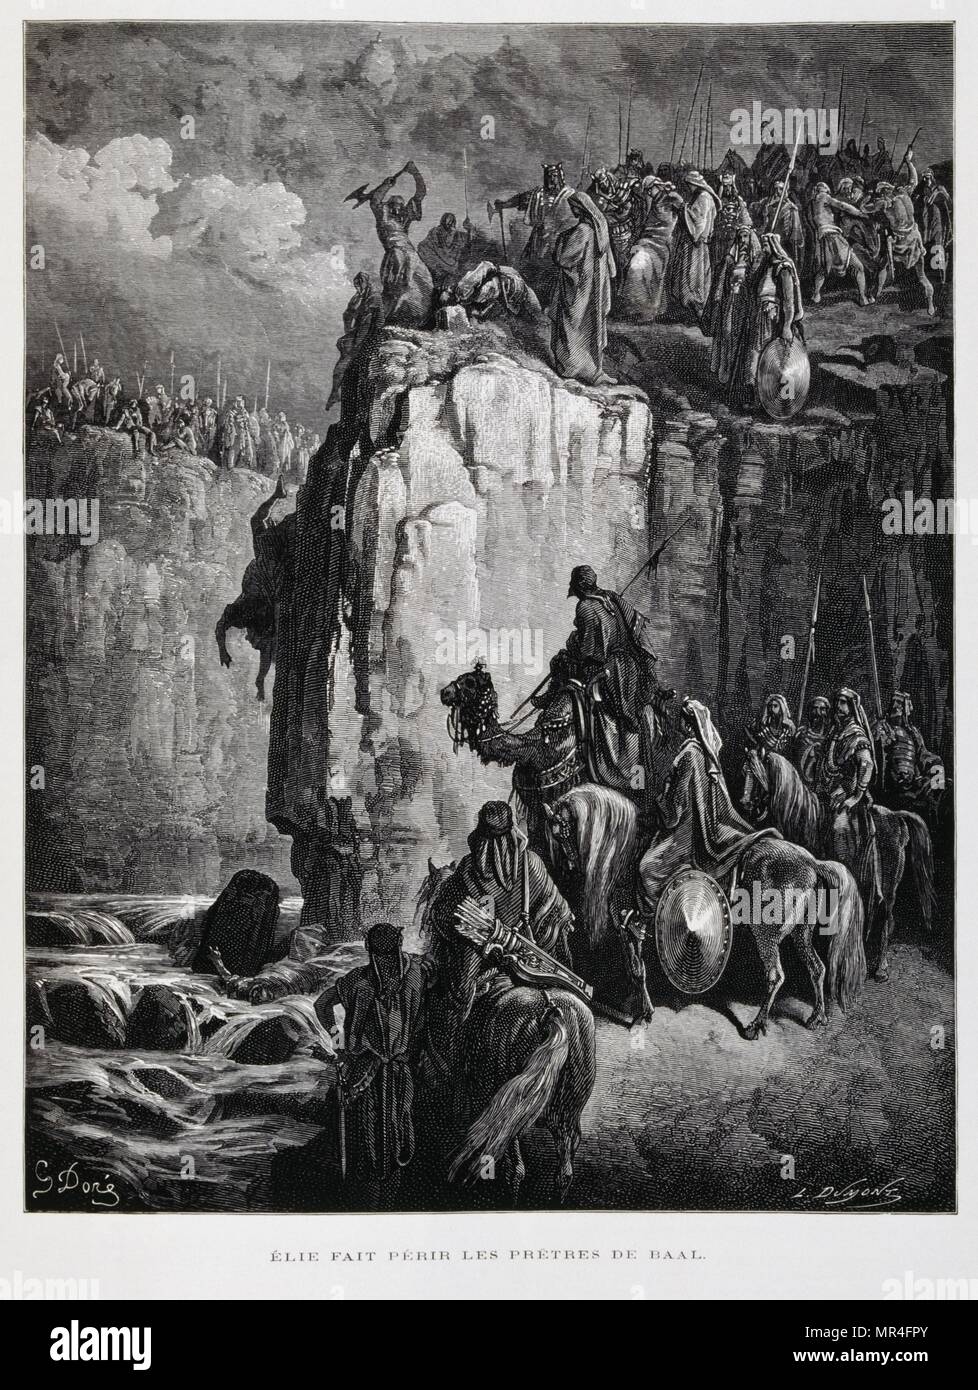 Elie smashes the idols of Baal, Illustration from the Dore Bible 1866. In 1866, the French artist and illustrator Gustave Doré (1832–1883), published a series of 241 wood engravings for a new deluxe edition of the 1843 French translation of the Vulgate Bible, popularly known as the Bible de Tours. This new edition was known as La Grande Bible de Tours and its illustrations were immensely successful. Stock Photo